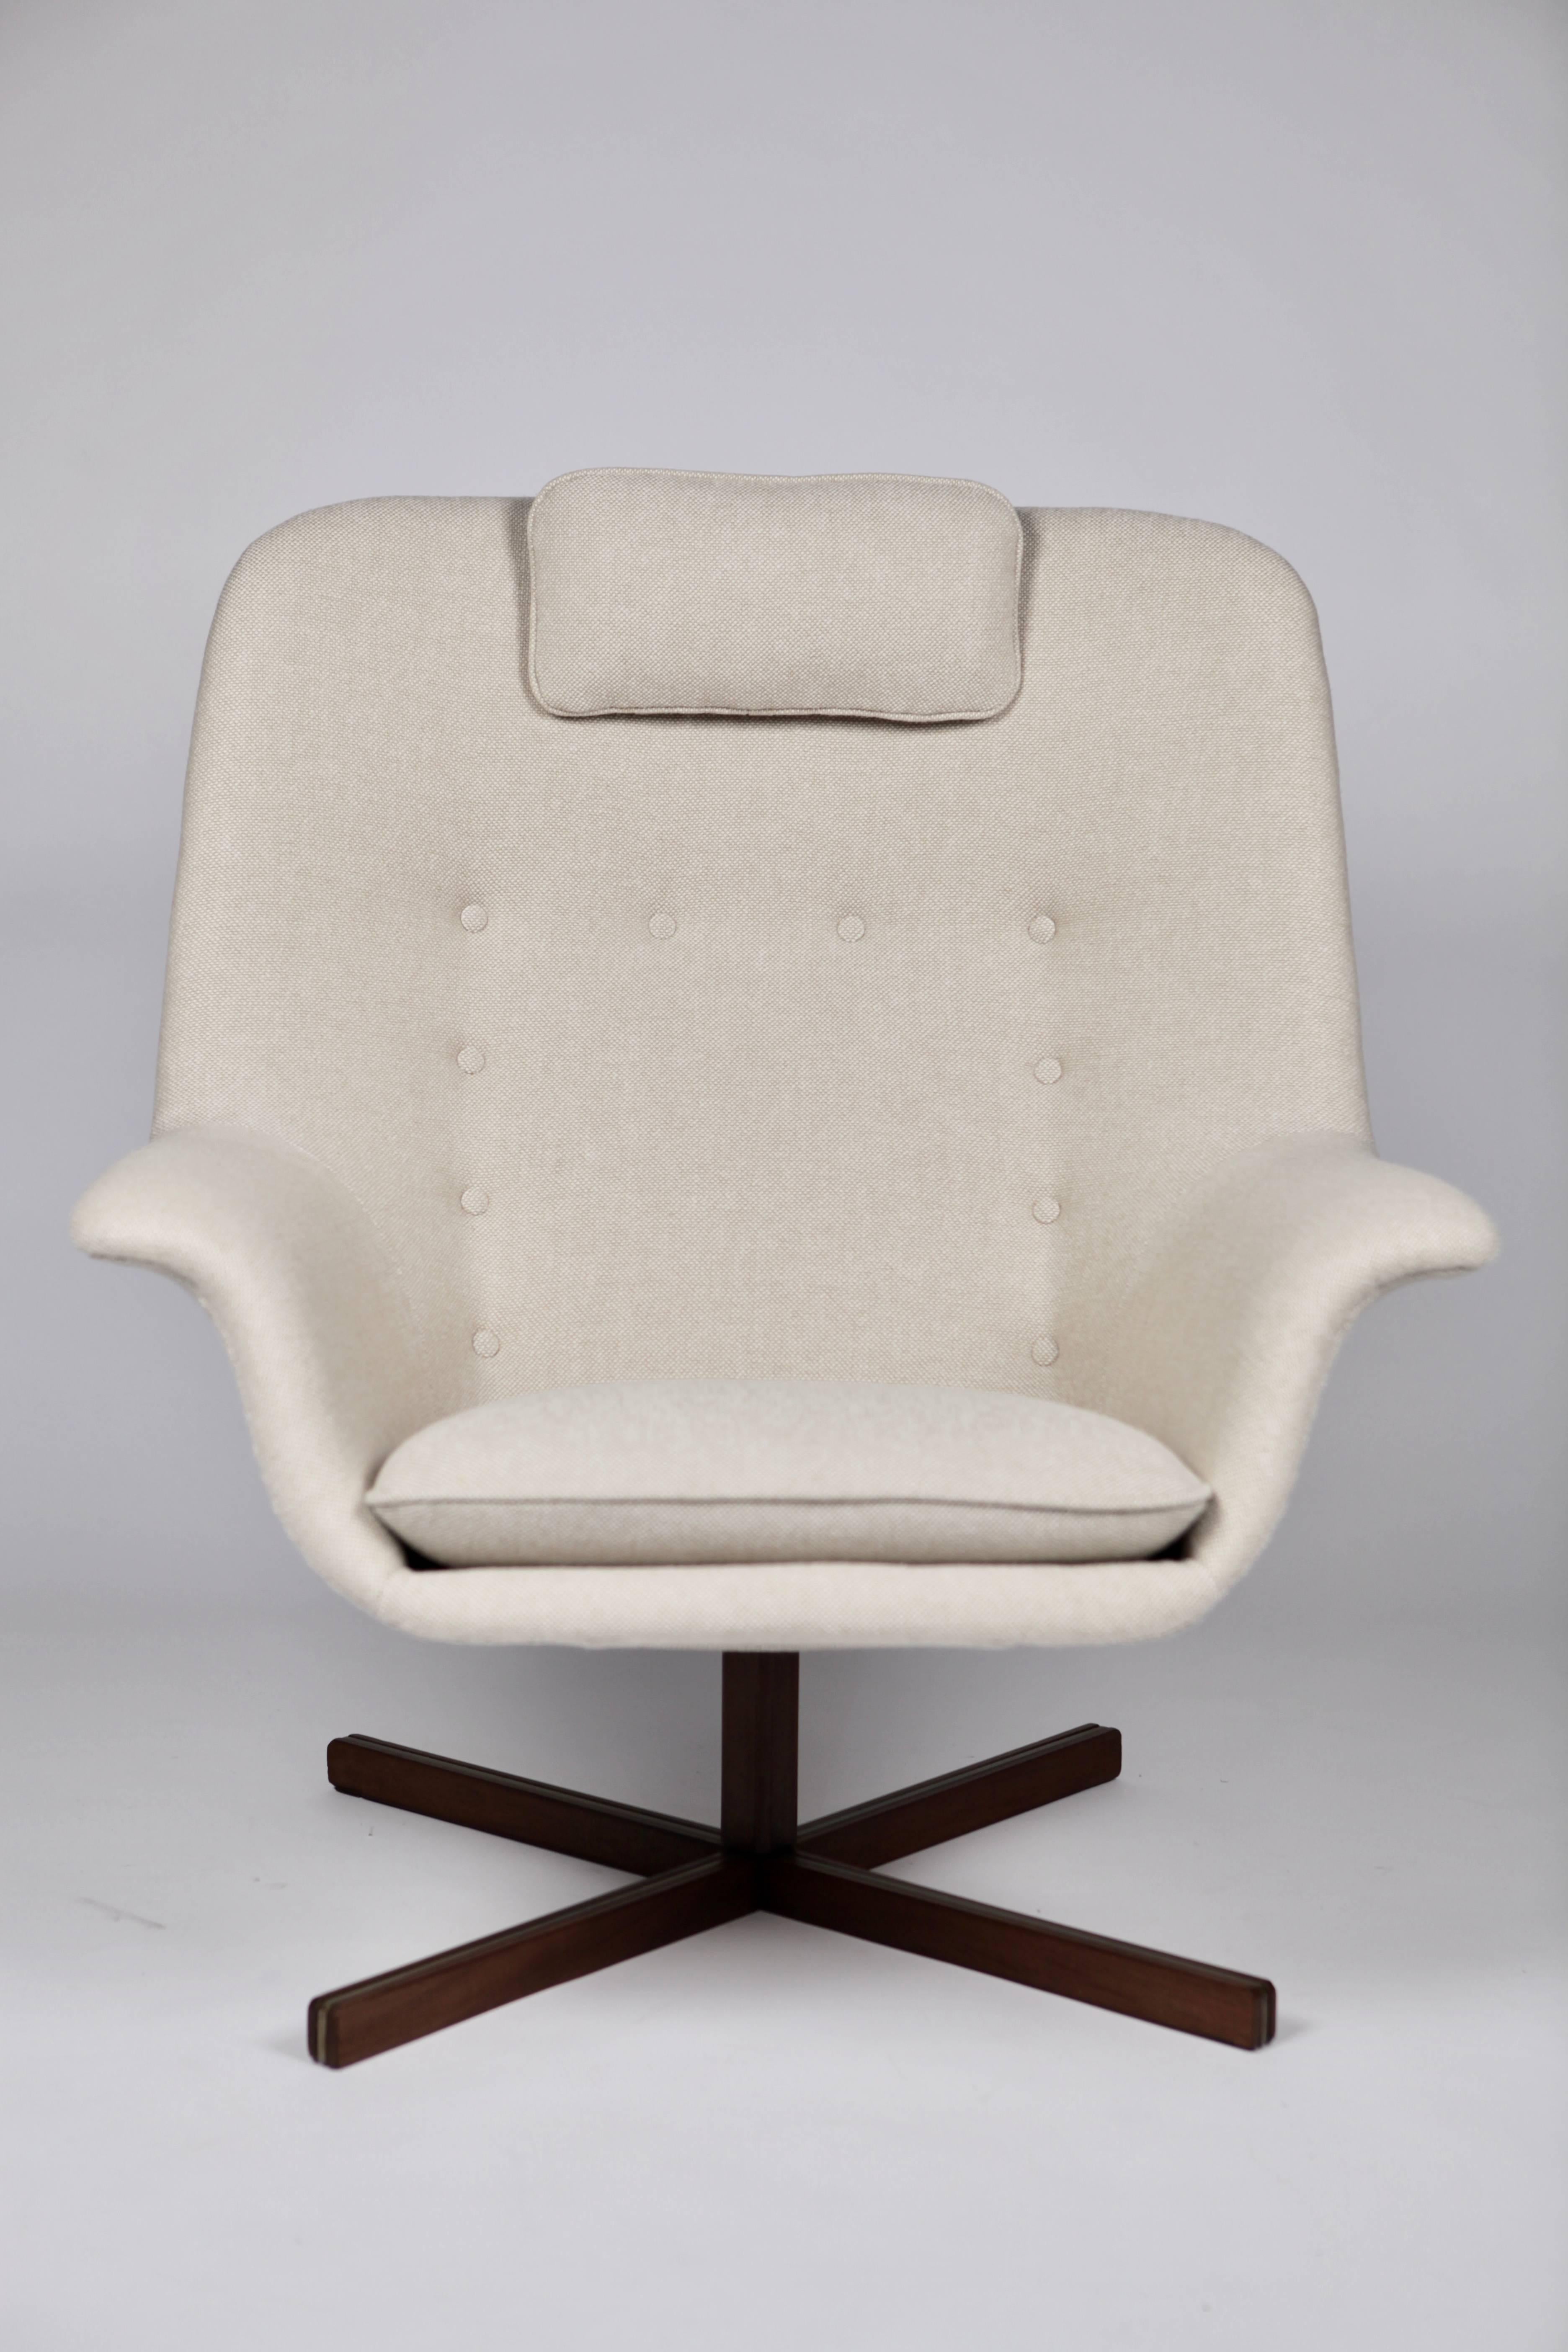 Mid-20th Century Carl Gustaf Hiort af Ornäs, Caravelle Armchair, Finland, 1962 For Sale